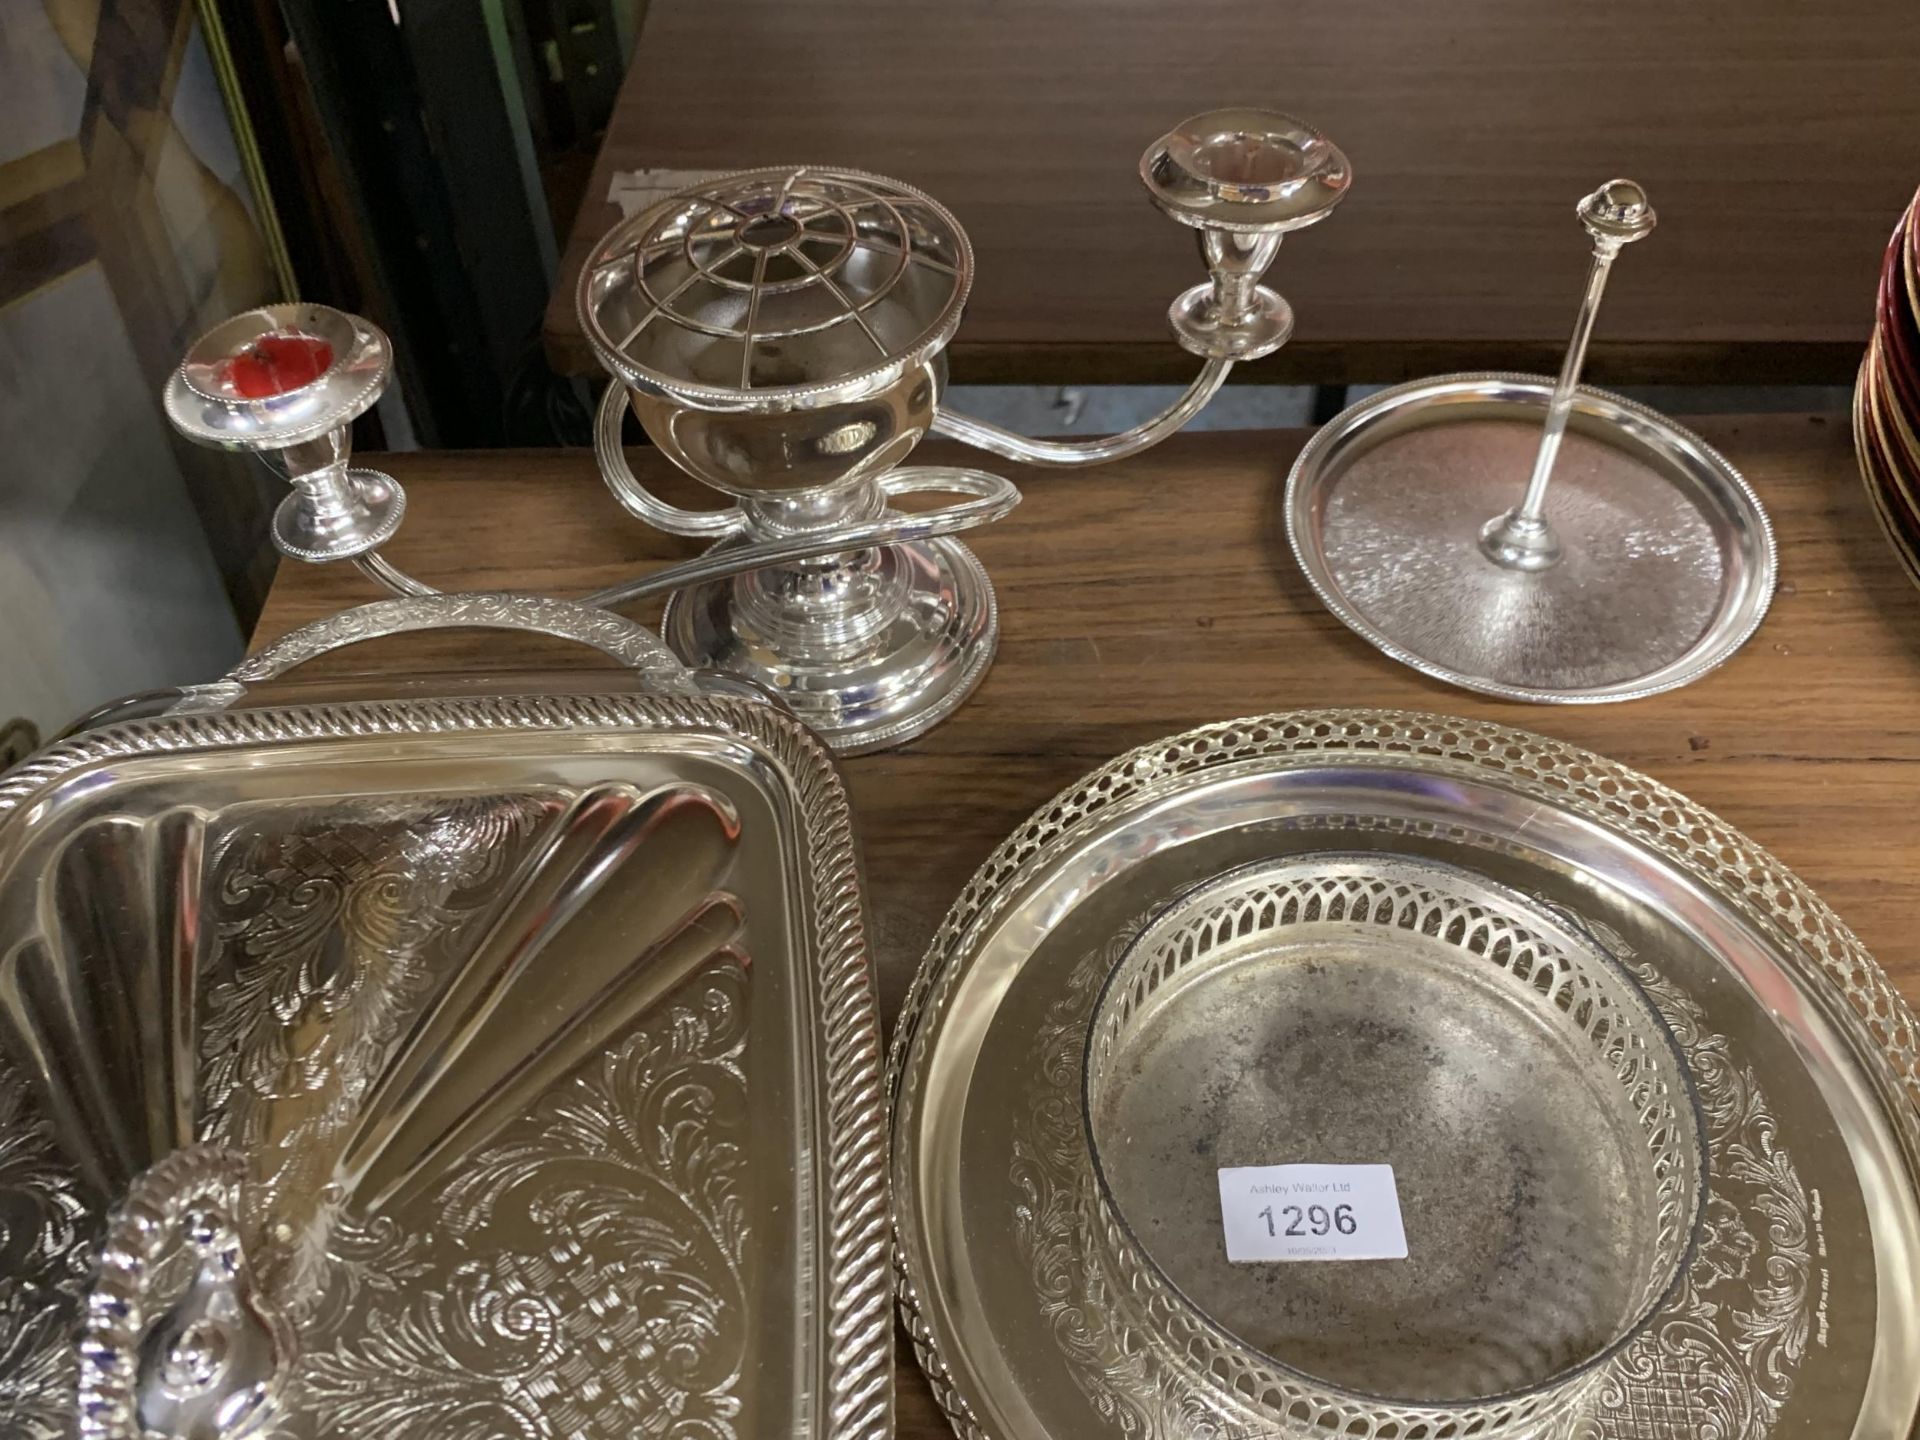 A QUANTITY OF SILVER PLATED ITEMS TO INCLUDE A SERVING DISH, CANDLEABRA, CRUET SET, TRAYS, ETC - Image 3 of 3